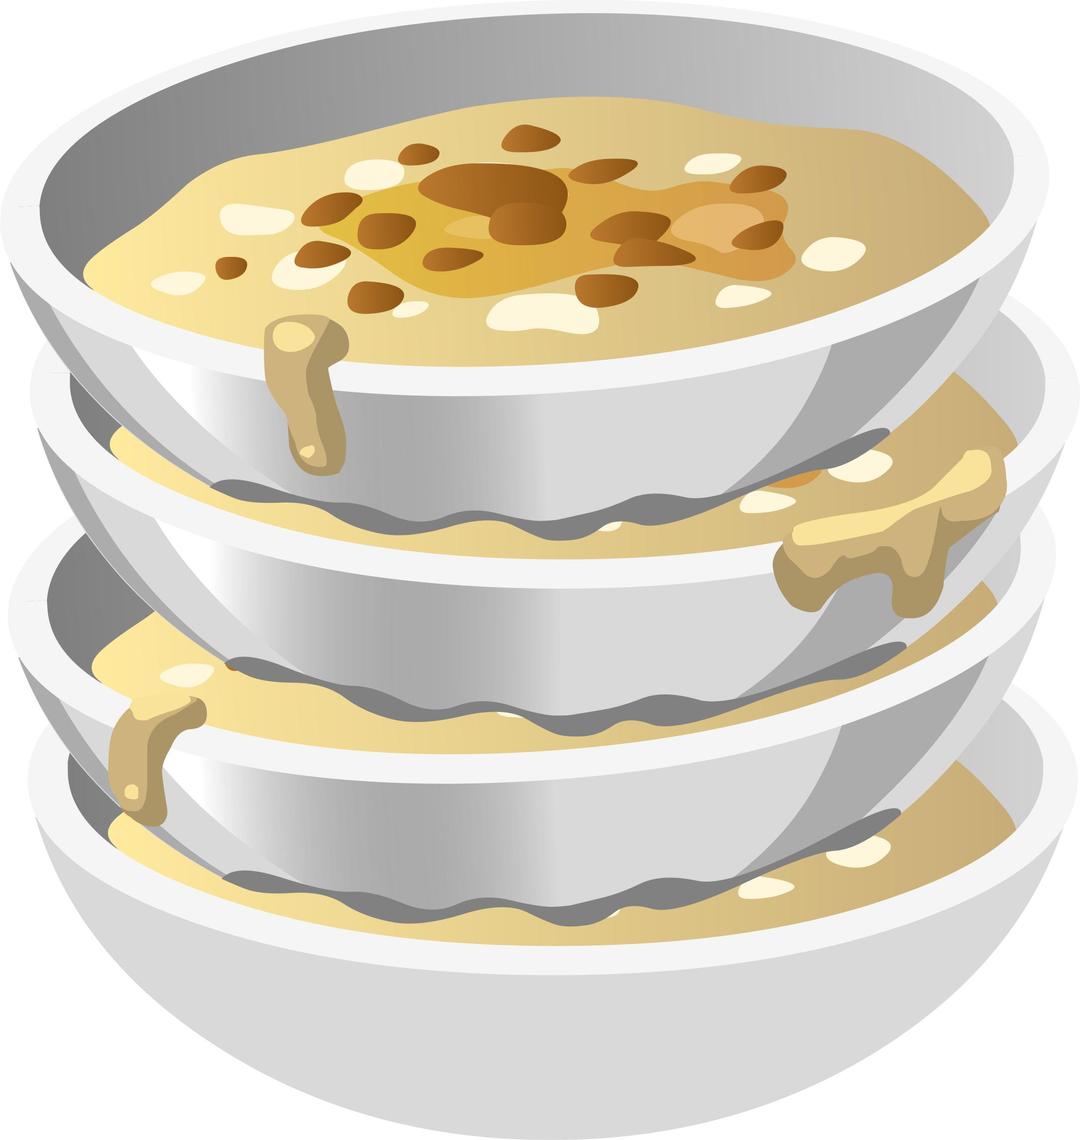 Food Yummy Gruel png transparent